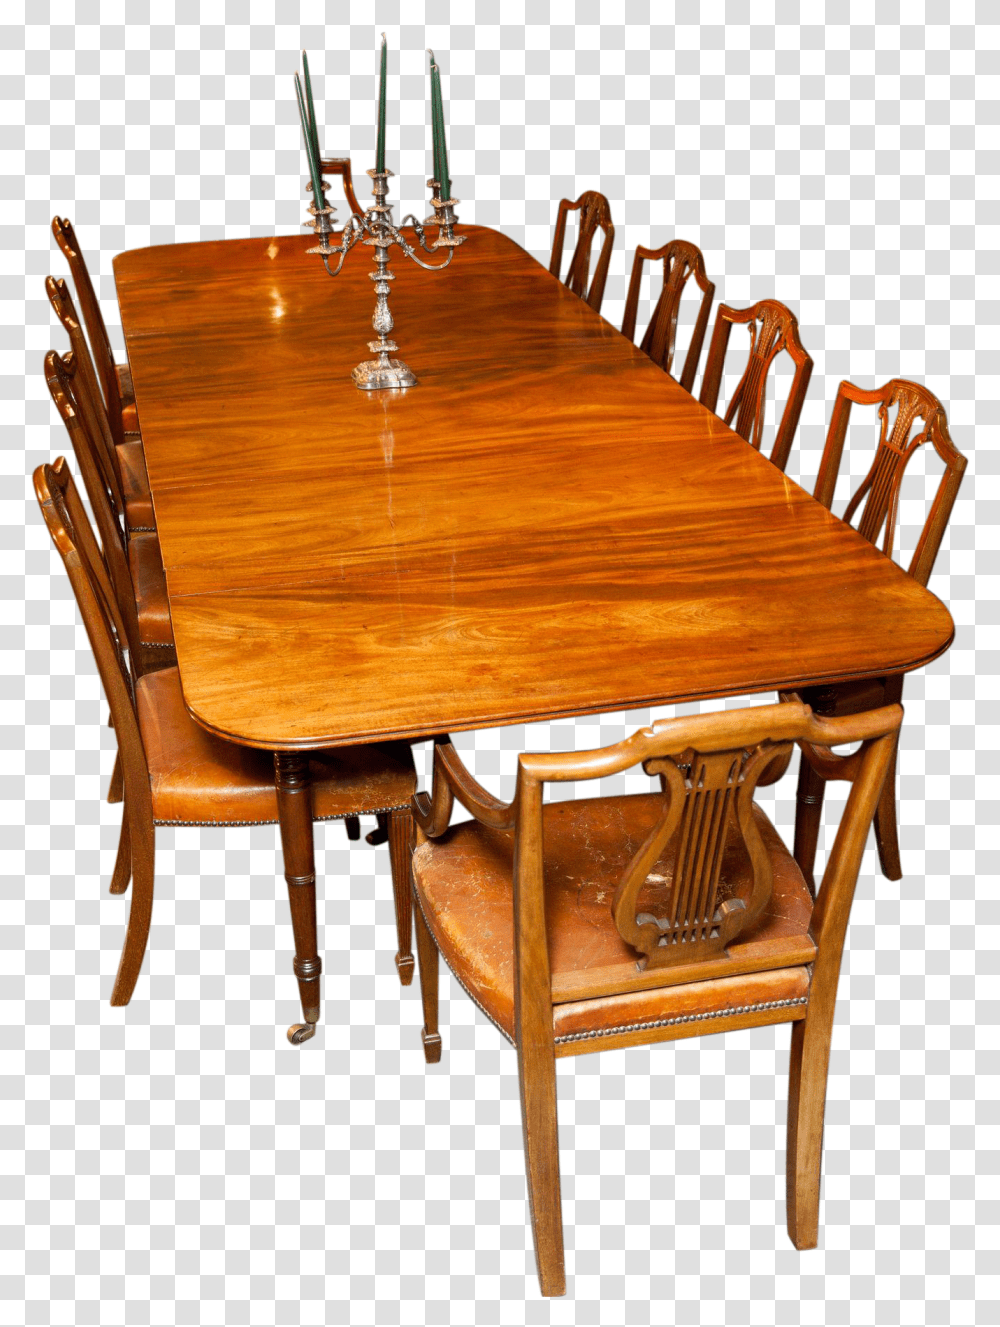 A Rare English Antique Mahogany Campaign Dining Table Kitchen Amp Dining Room Table, Chair, Furniture, Tabletop, Wood Transparent Png